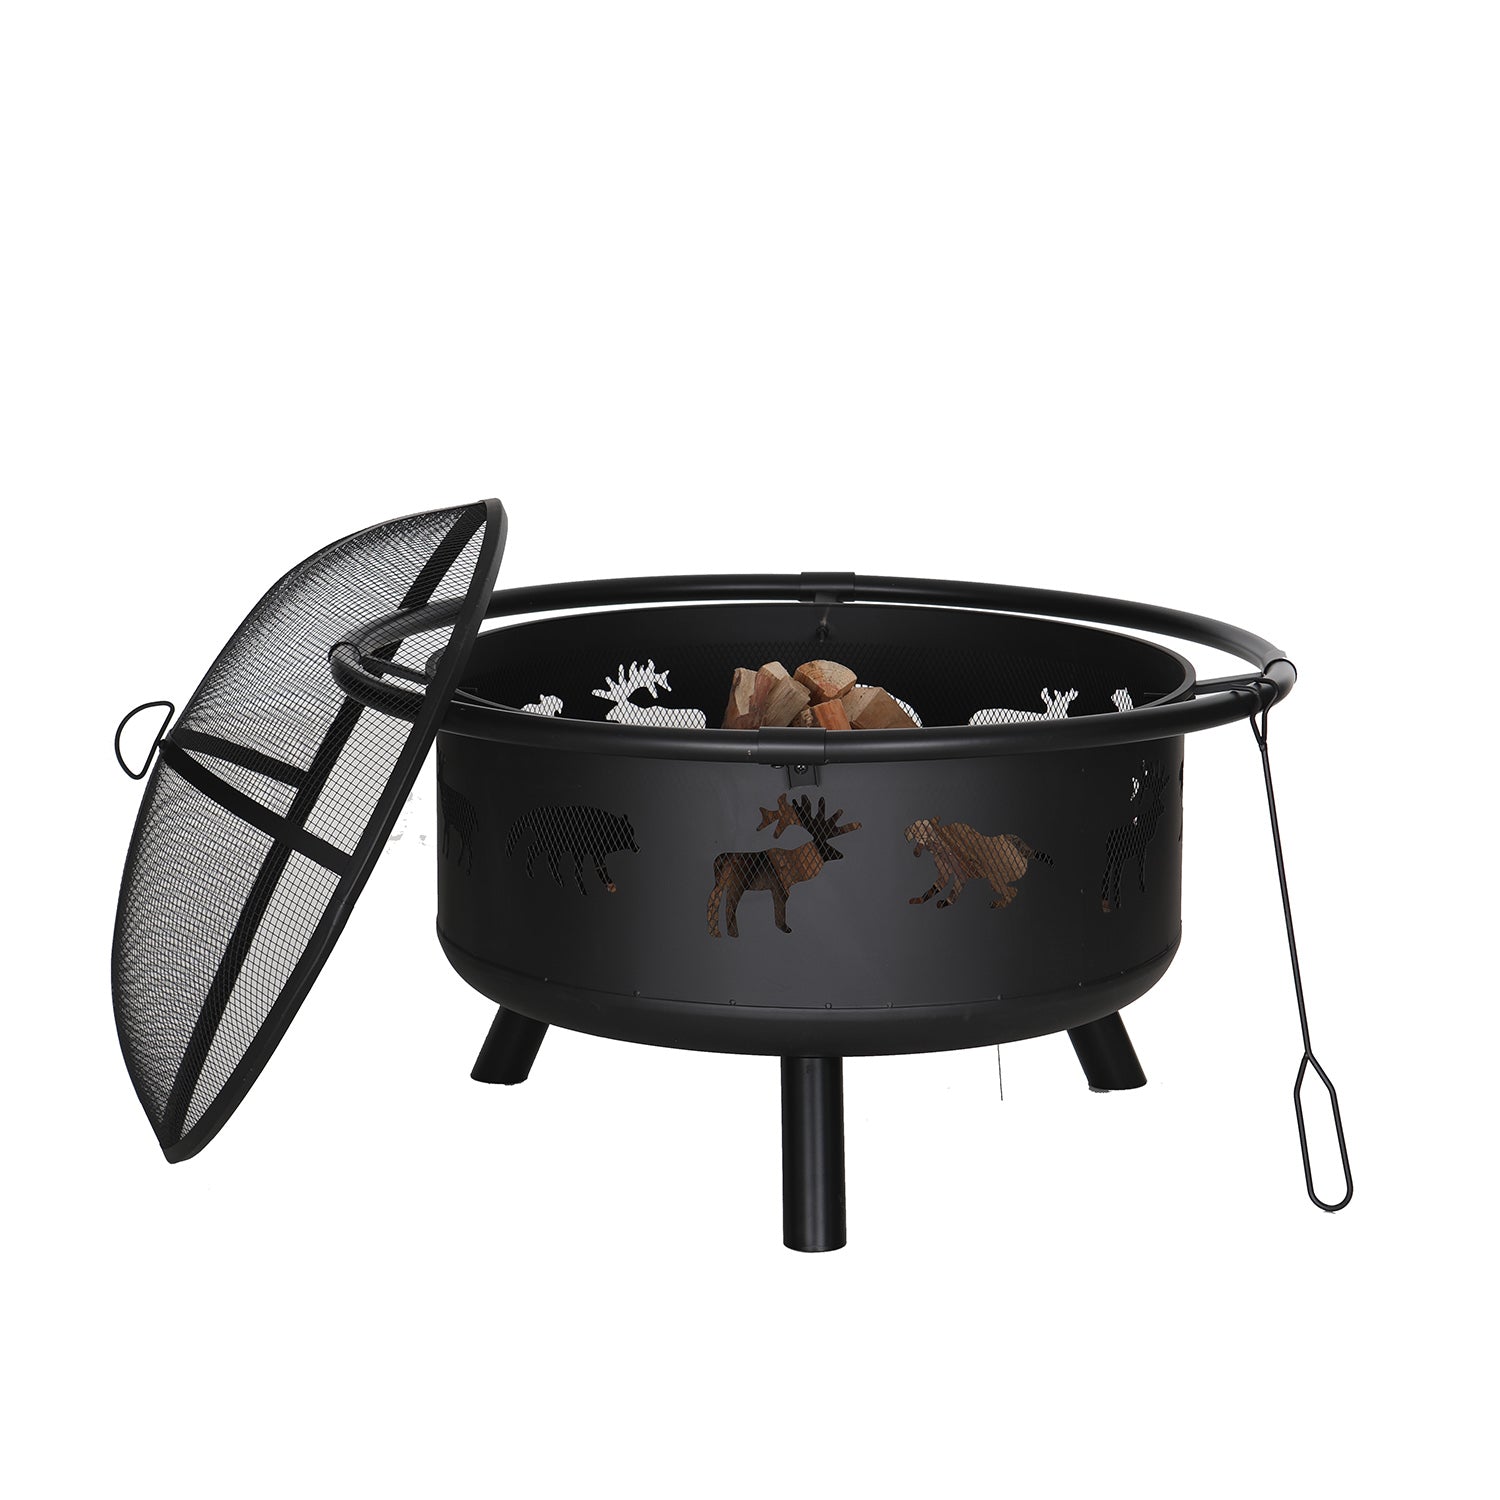 PHI VILLA 36" Animal Shape Hollow-out Pattern Fire Pit with Lid & Poker